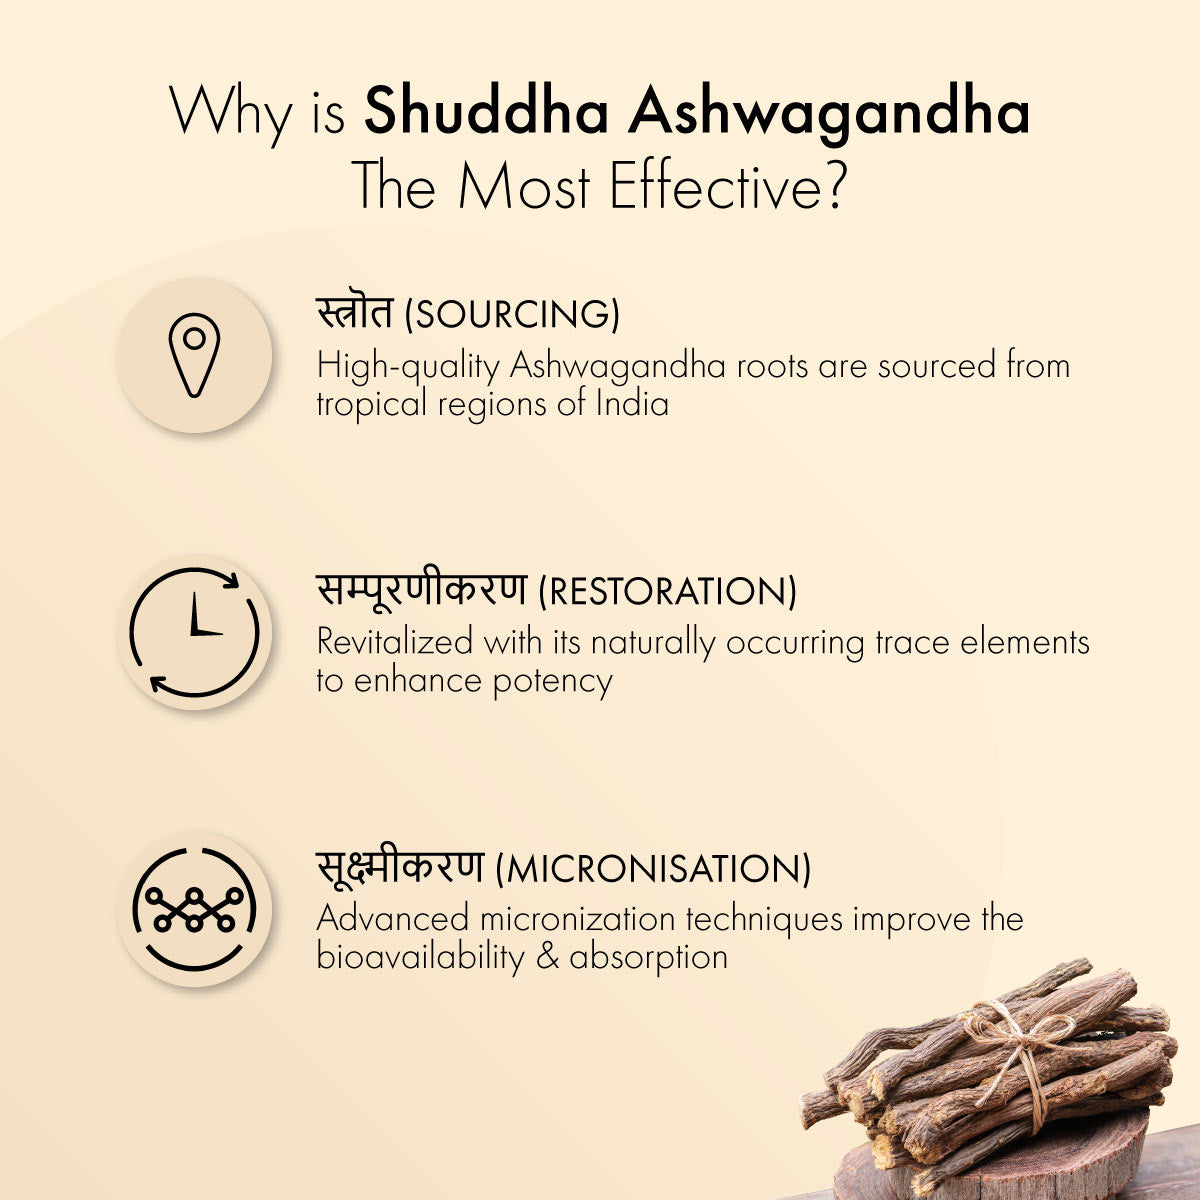 Shuddha Ashwagandha Tablets: Most Effective Stress Reliever & Immunity Booster